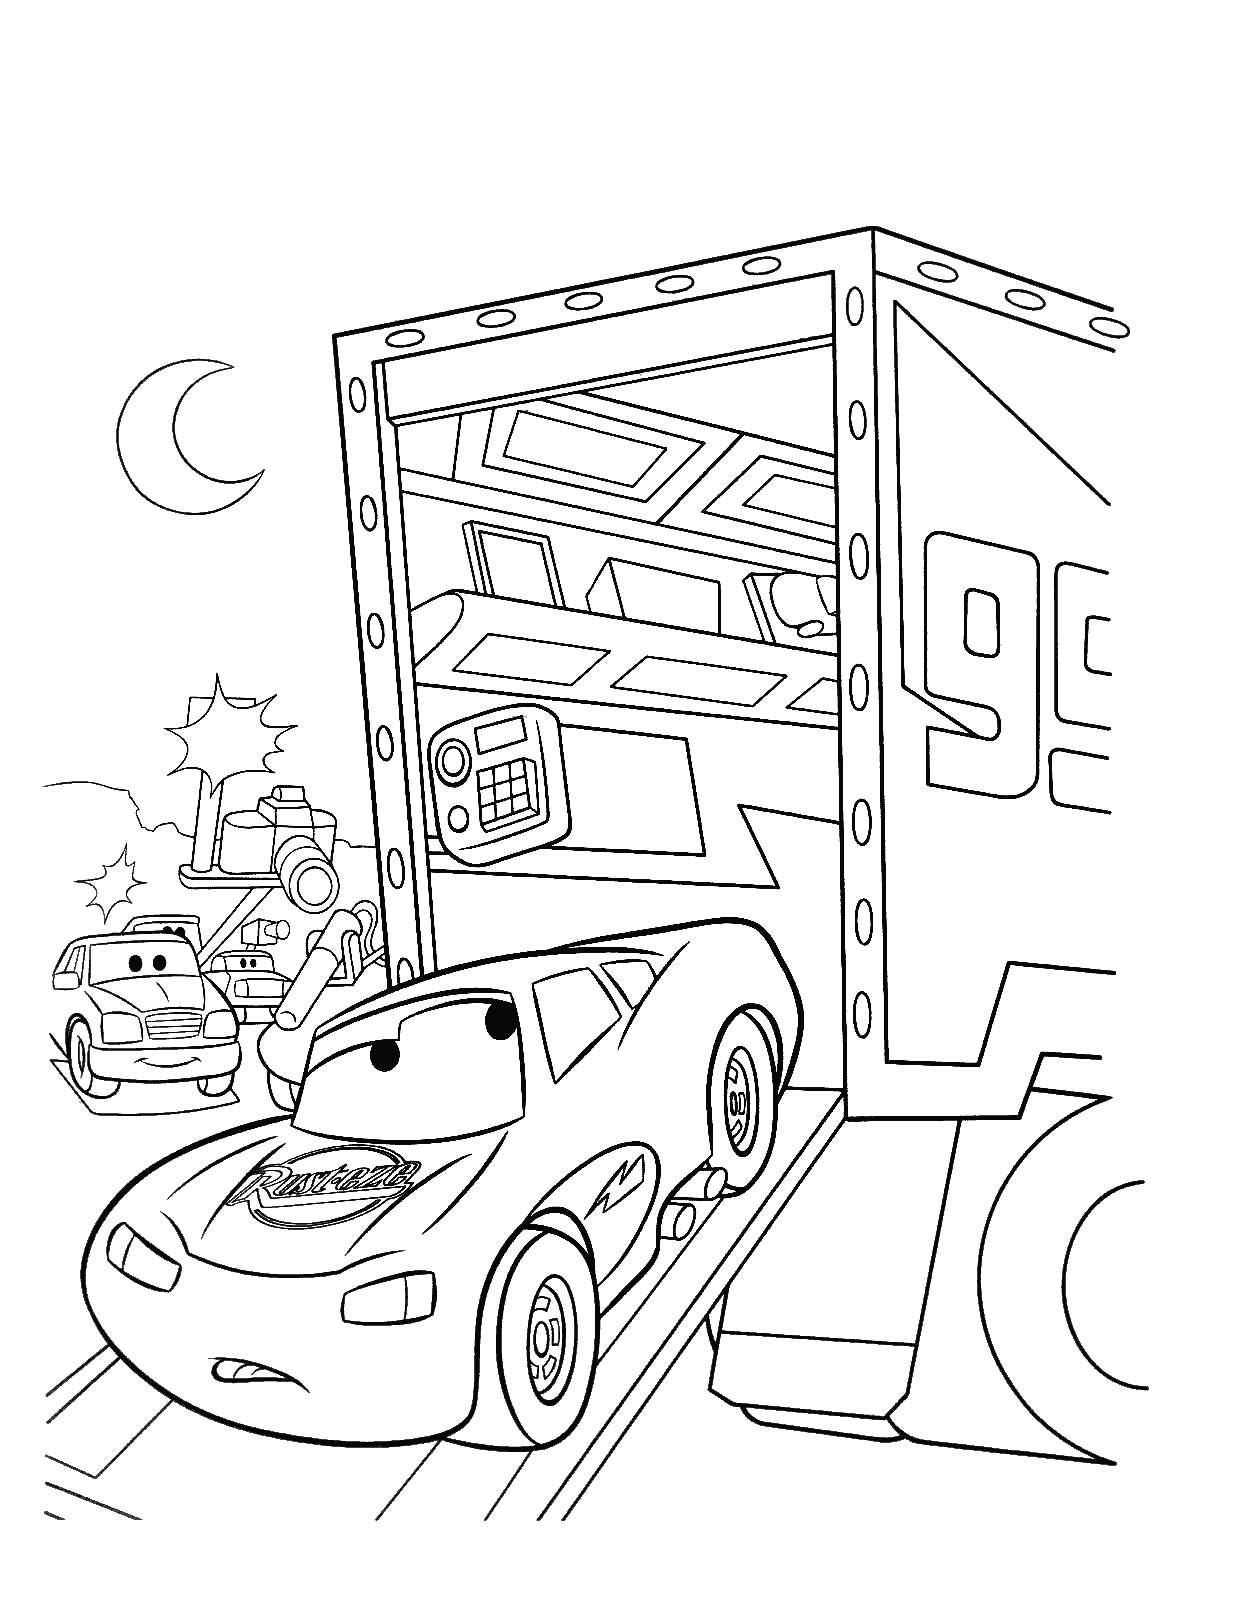 Free Printable Lightning McQueen Coloring Pages for Kids   Best ...